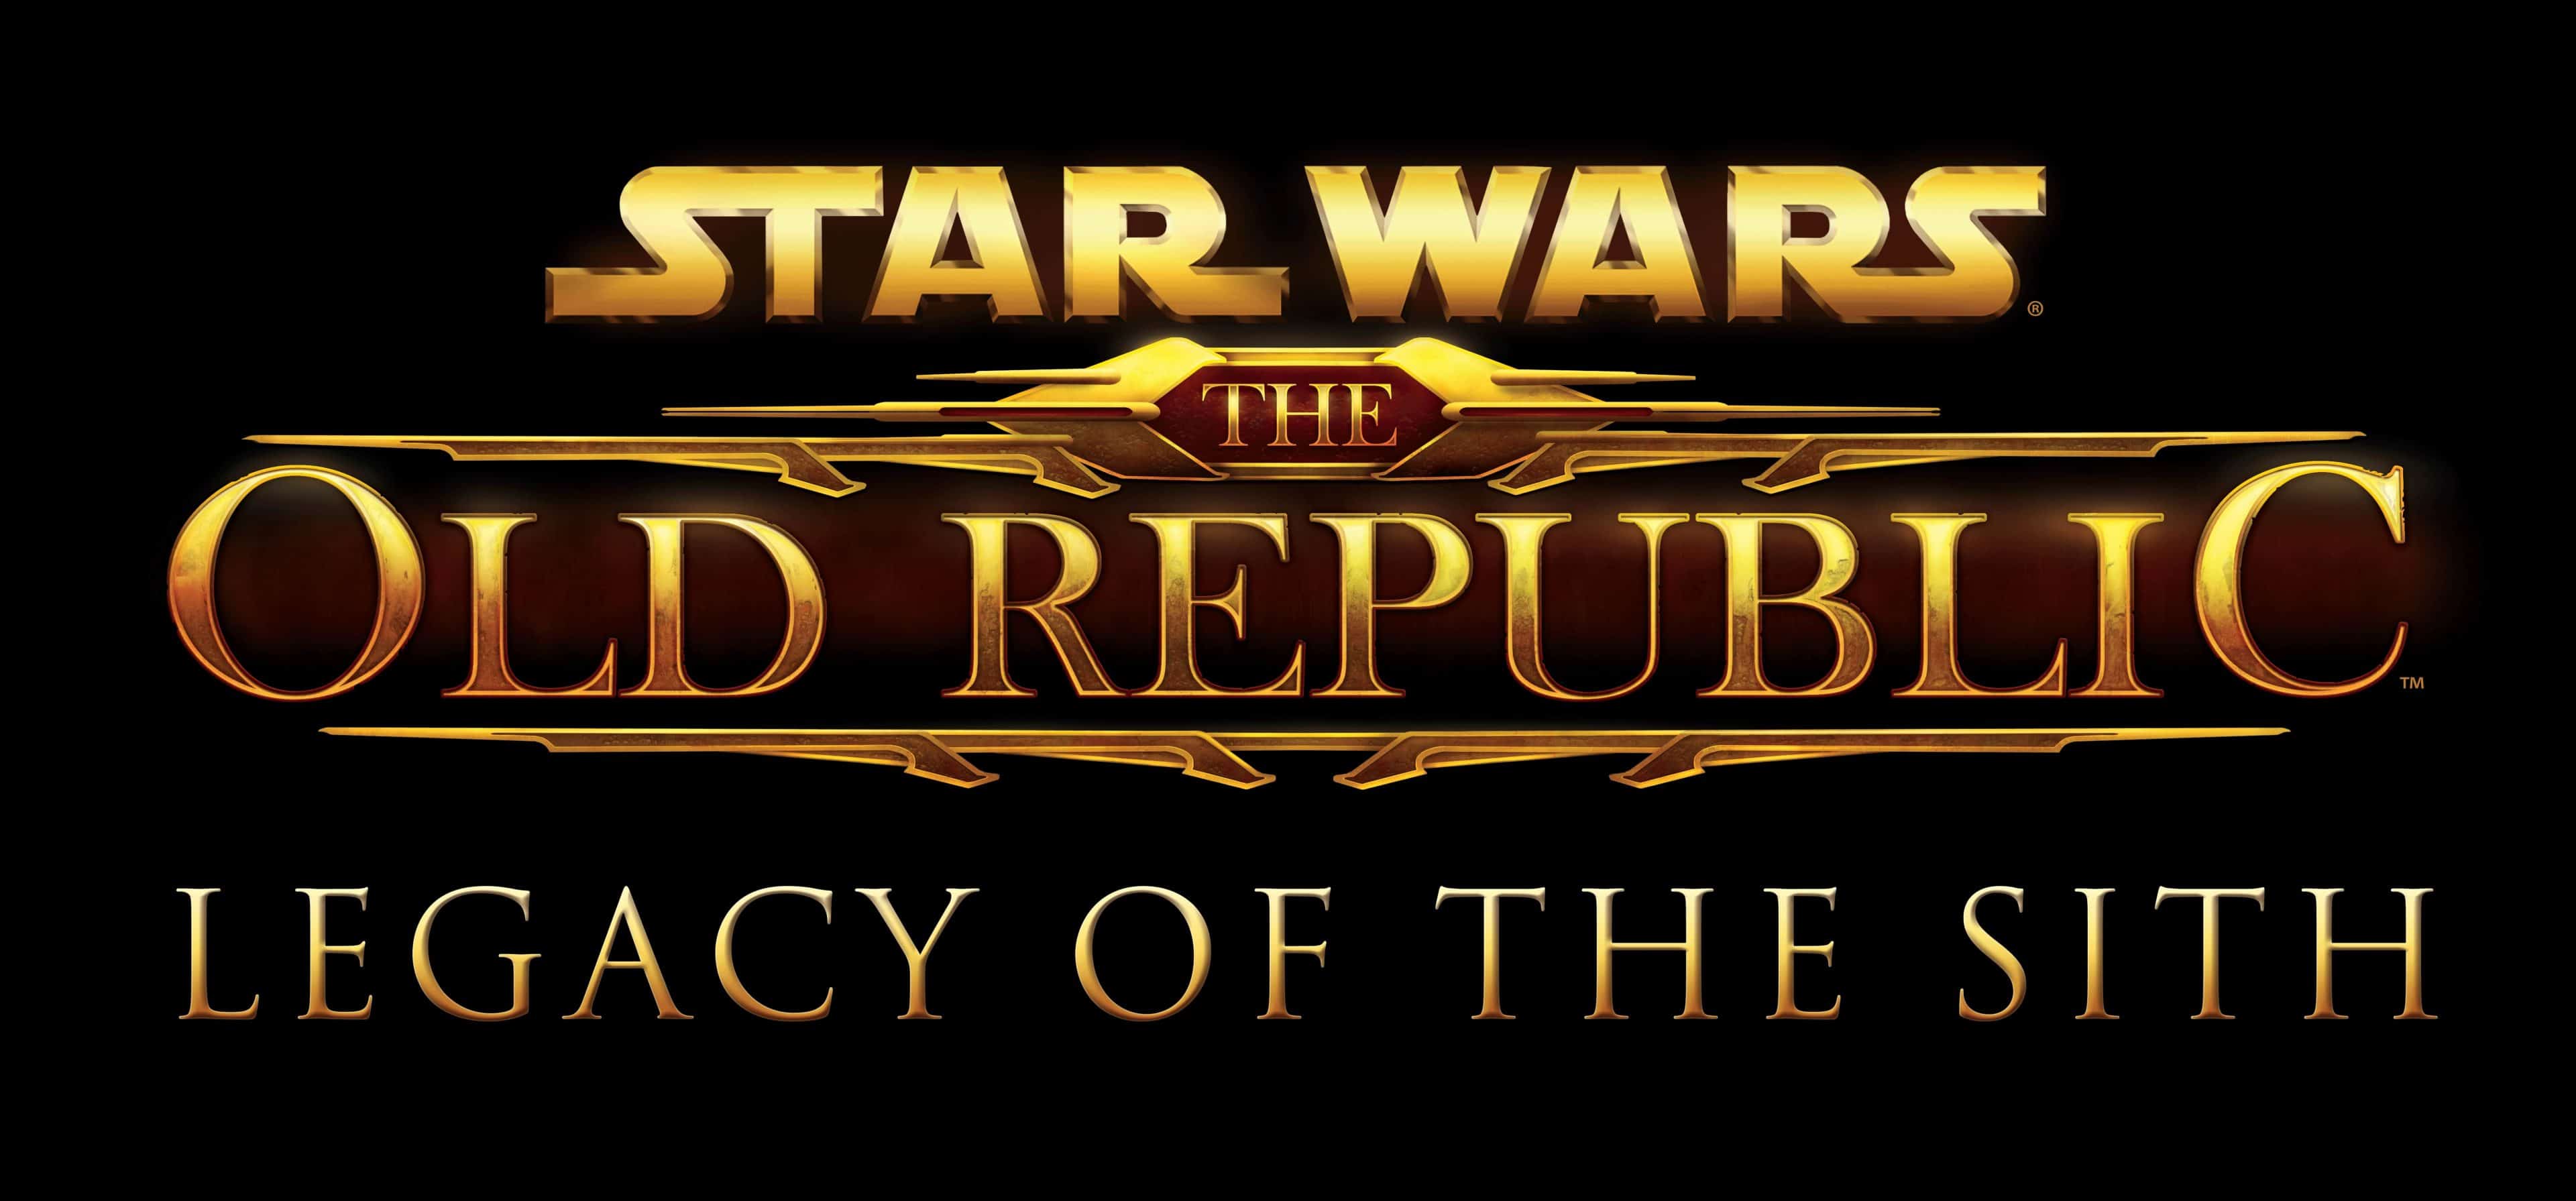 Star wars the old republic 2 scaled 1